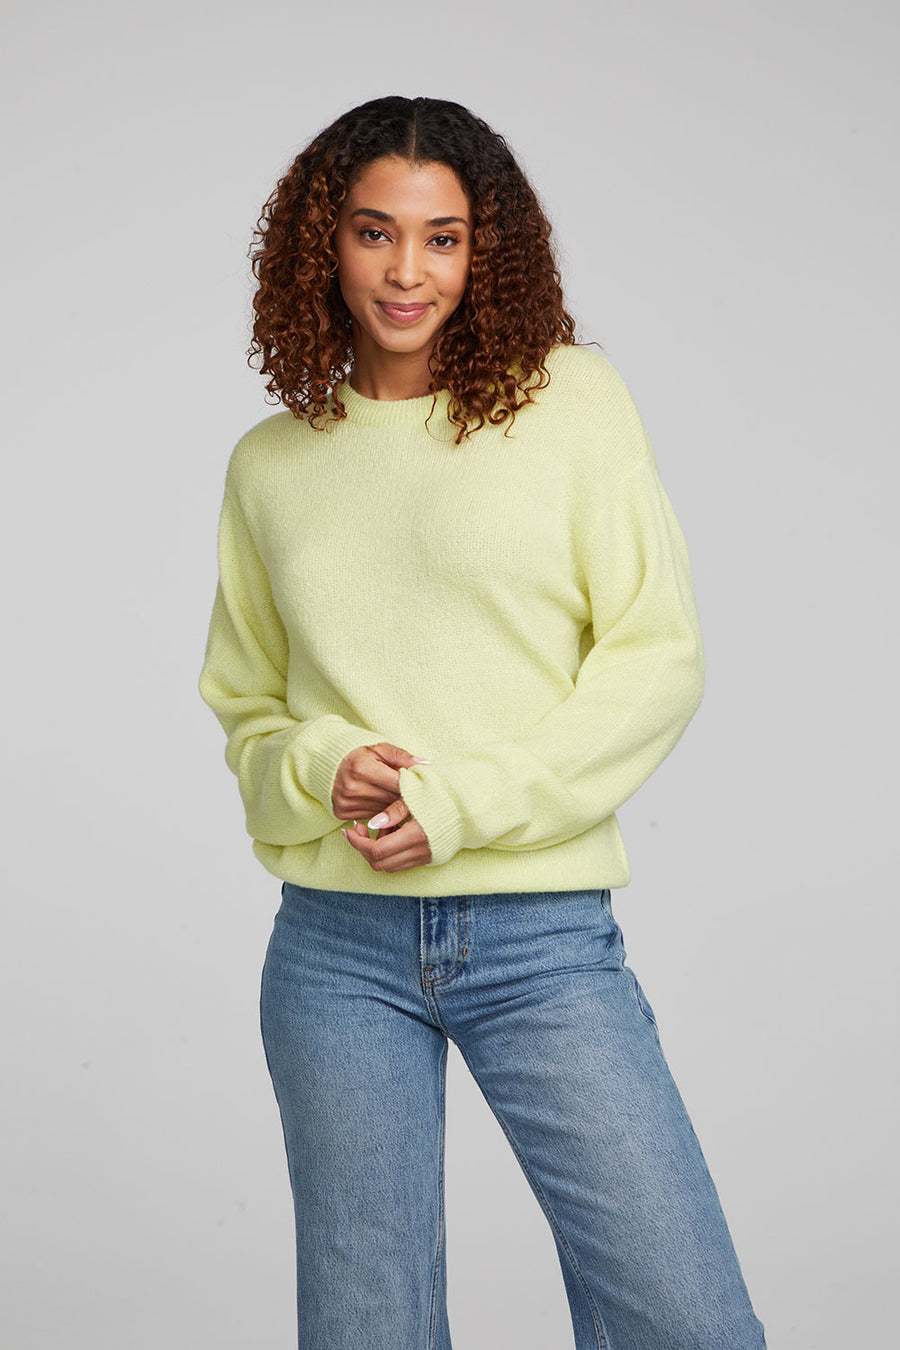 Frankie Limelight Pullover WOMENS chaserbrand